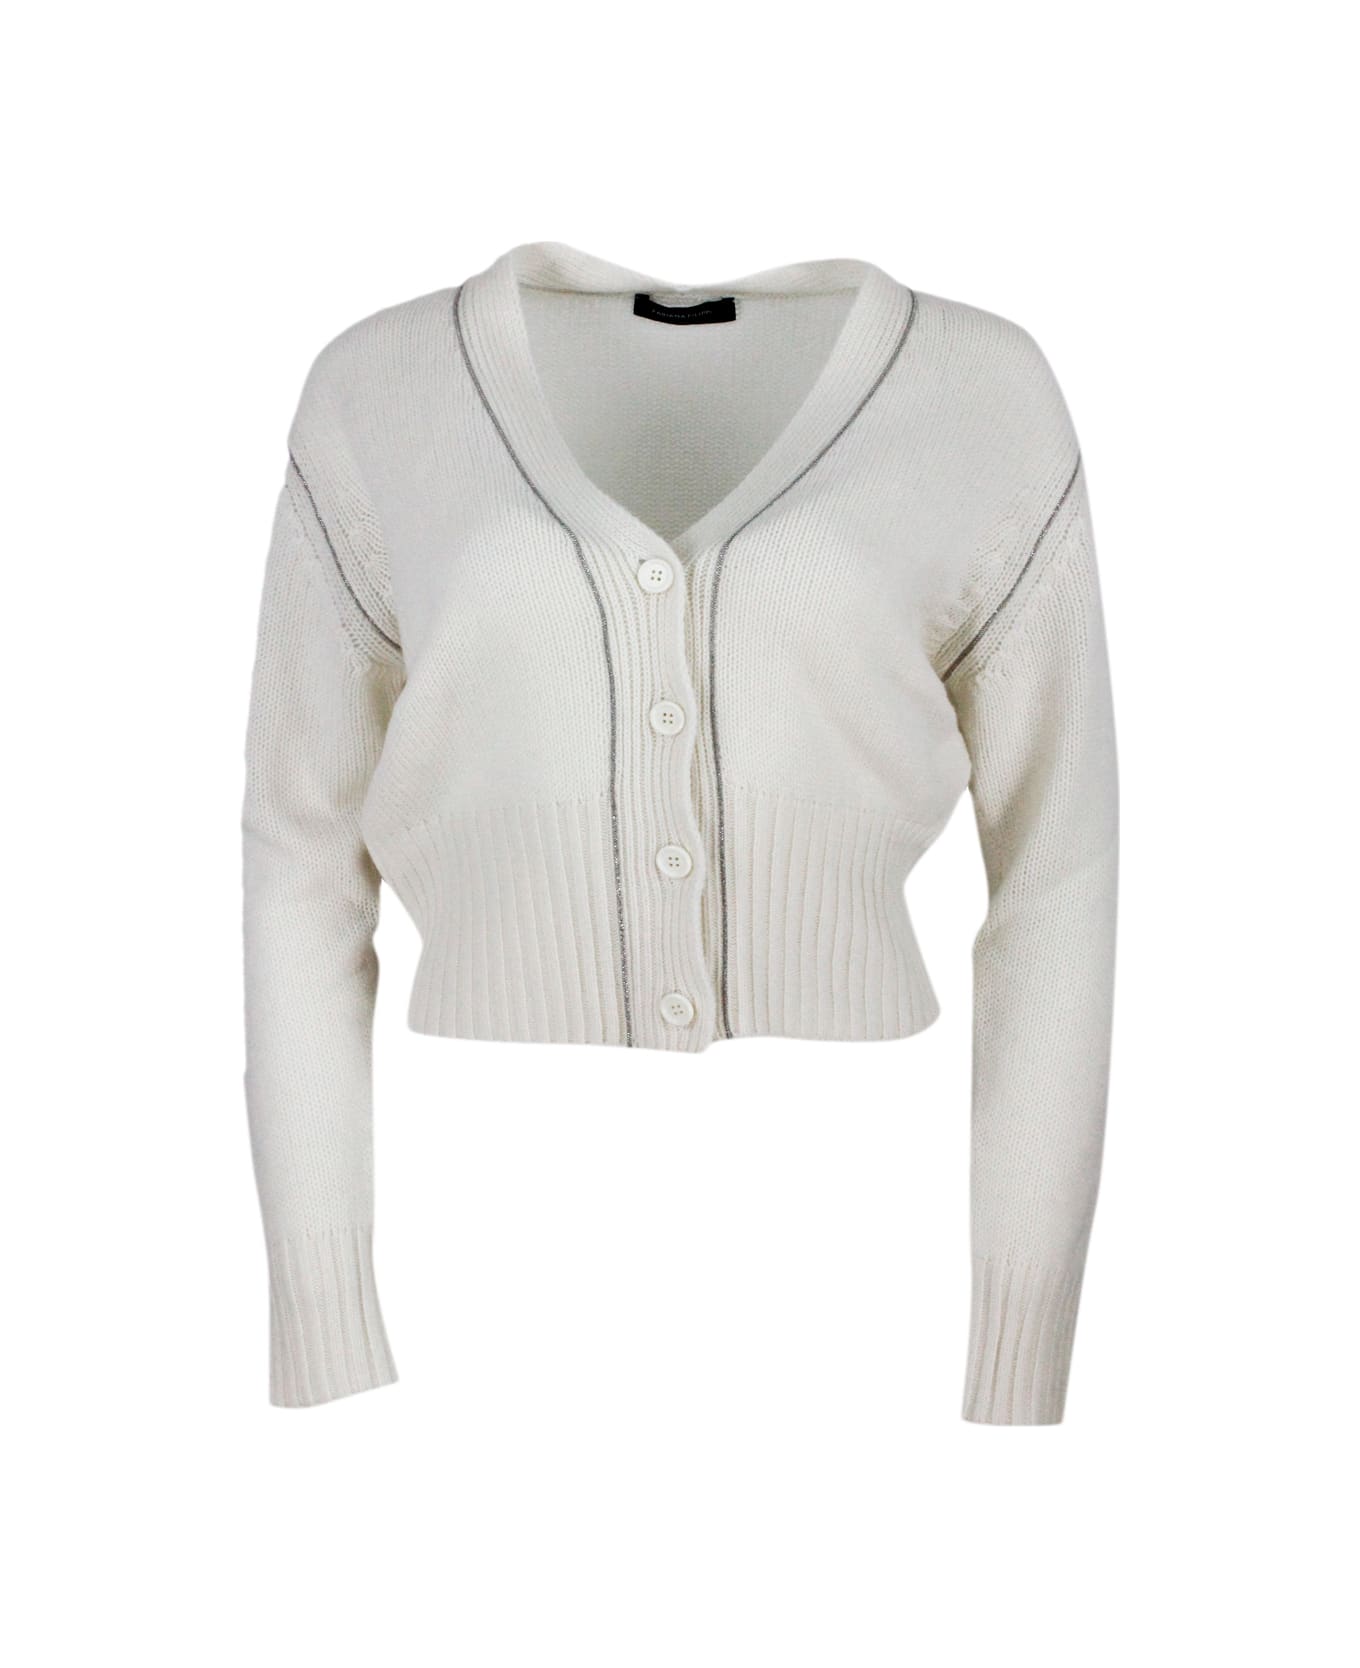 Fabiana Filippi Long-sleeved Cashmere Cardigan Sweater With Button Closure And Embellished With Rows Of Monili On The Front - cream